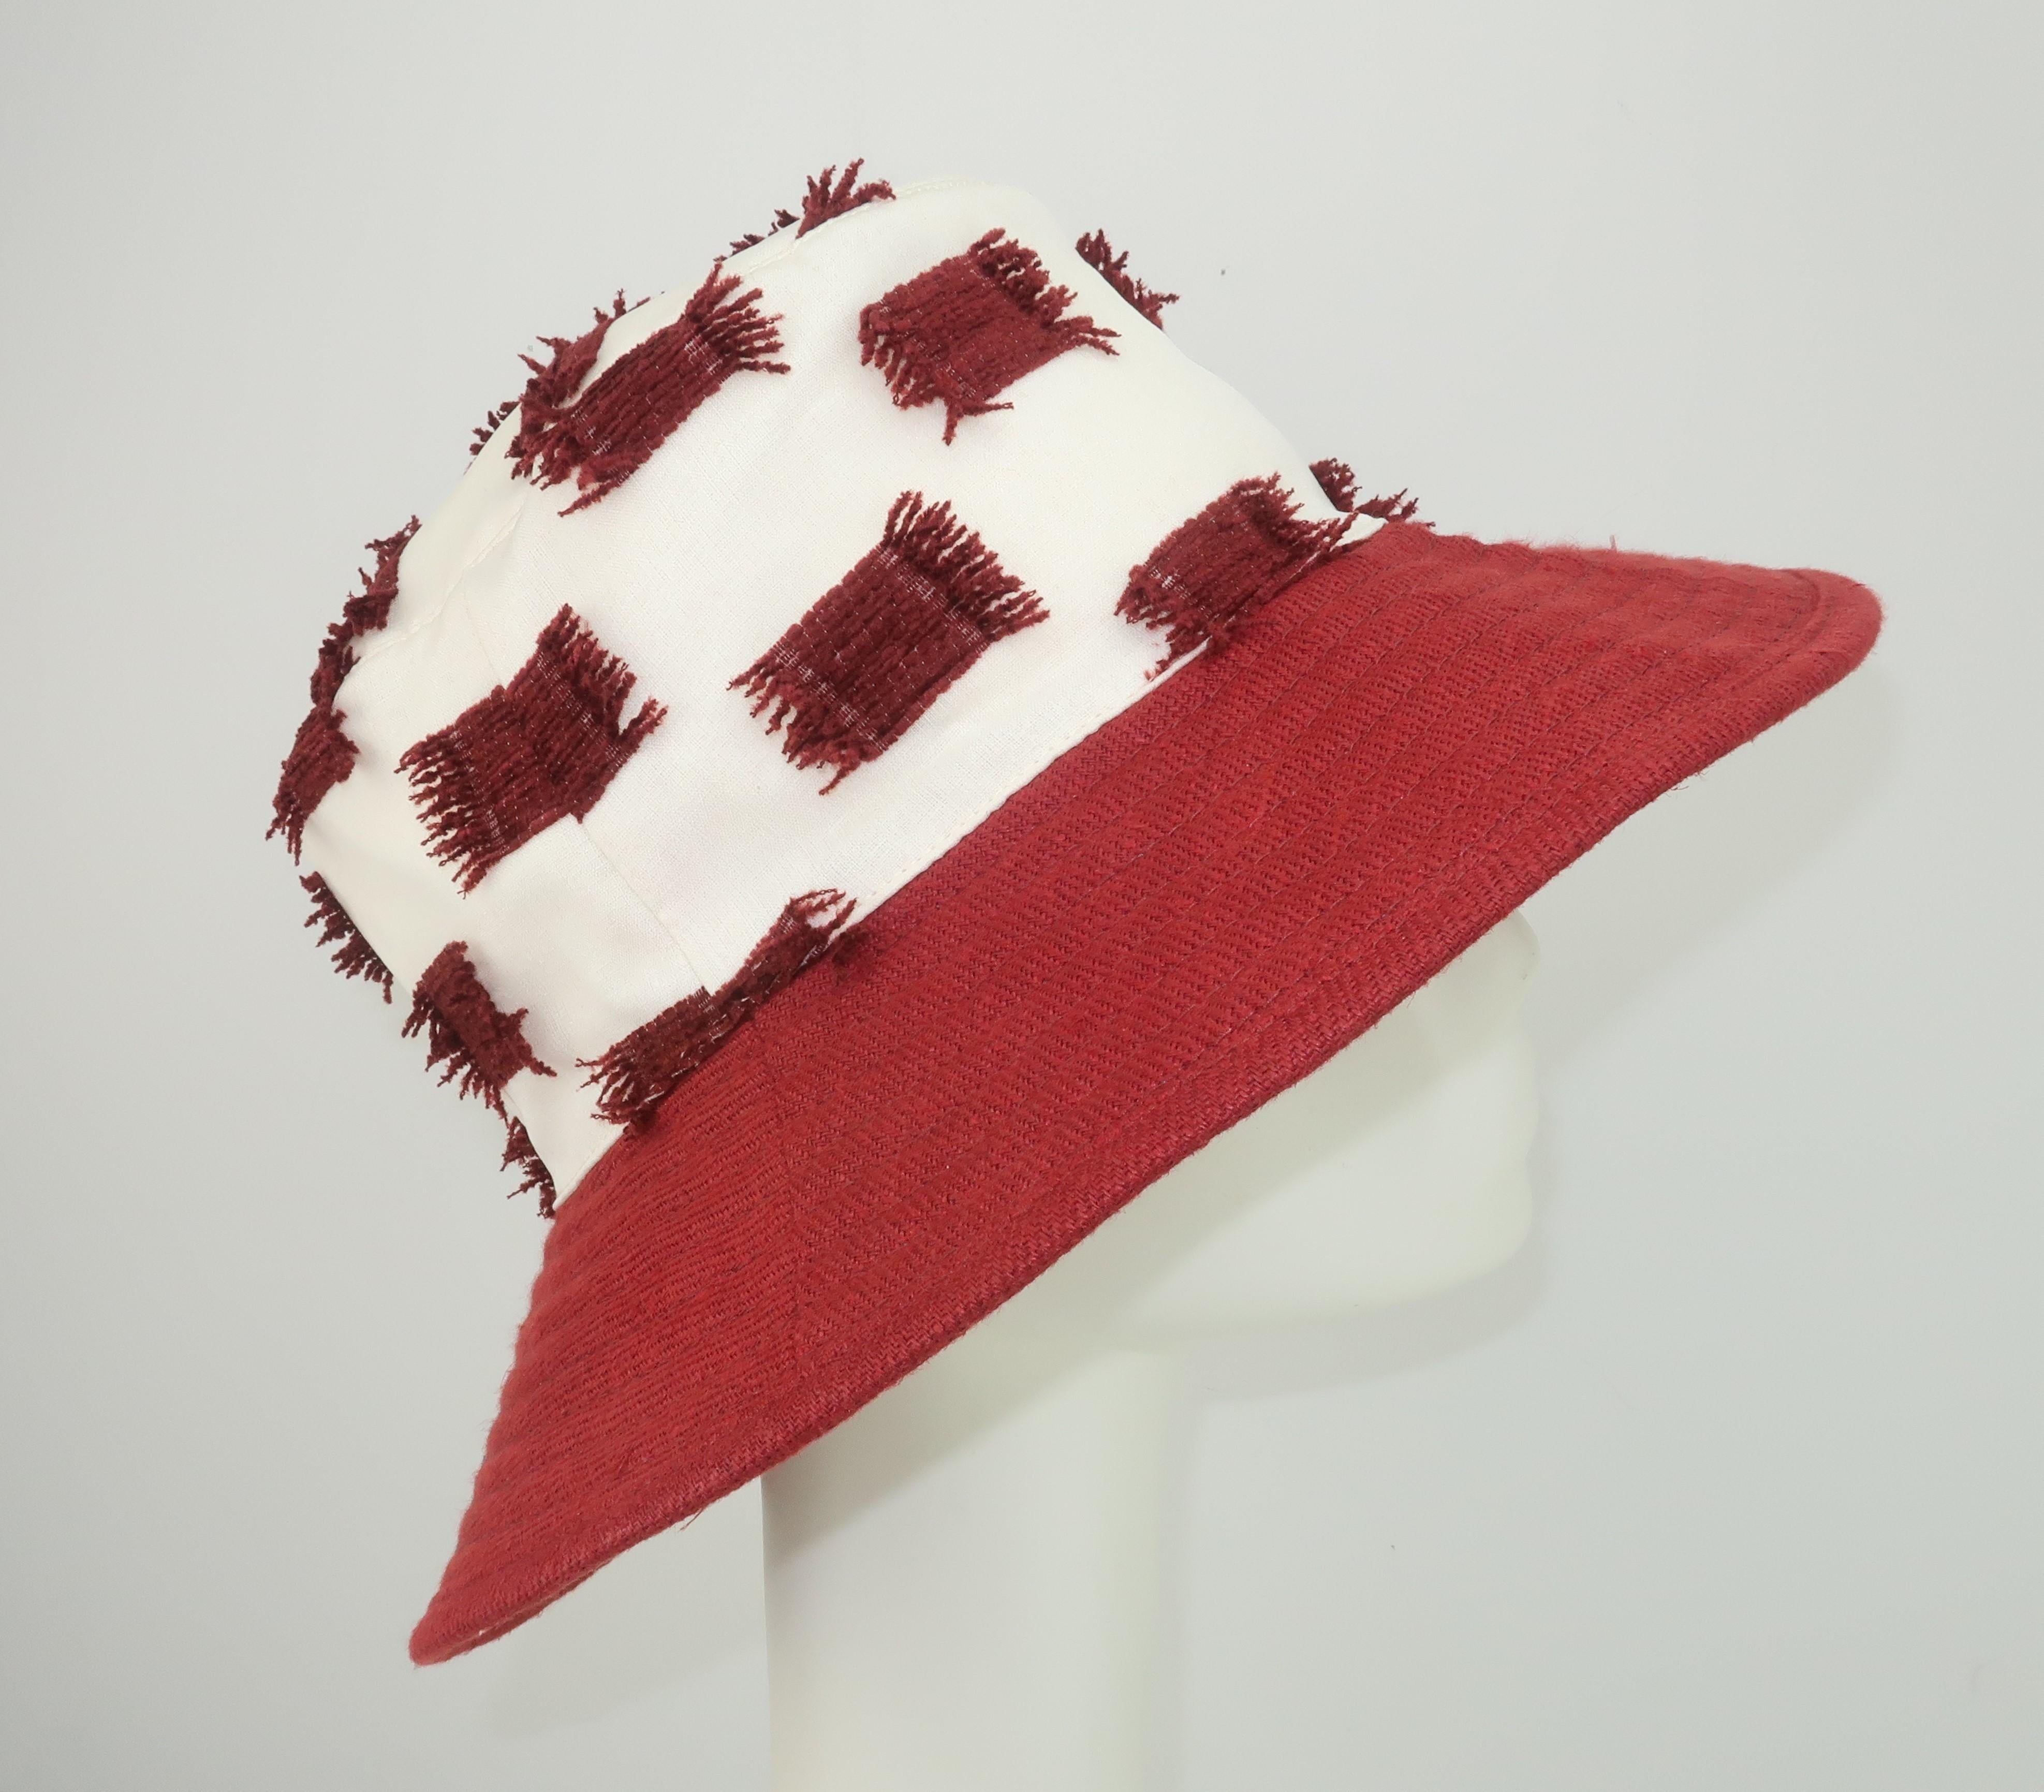 Go casual with Hermès signature style in this comfy bucket hat by Chapeaux Motsch, a famous Parisian hat atelier est. 1887 acquired by Hermès in 1991.  The hat combines texture and fabrics with a brick red brim in acrylic, that looks like wool, and